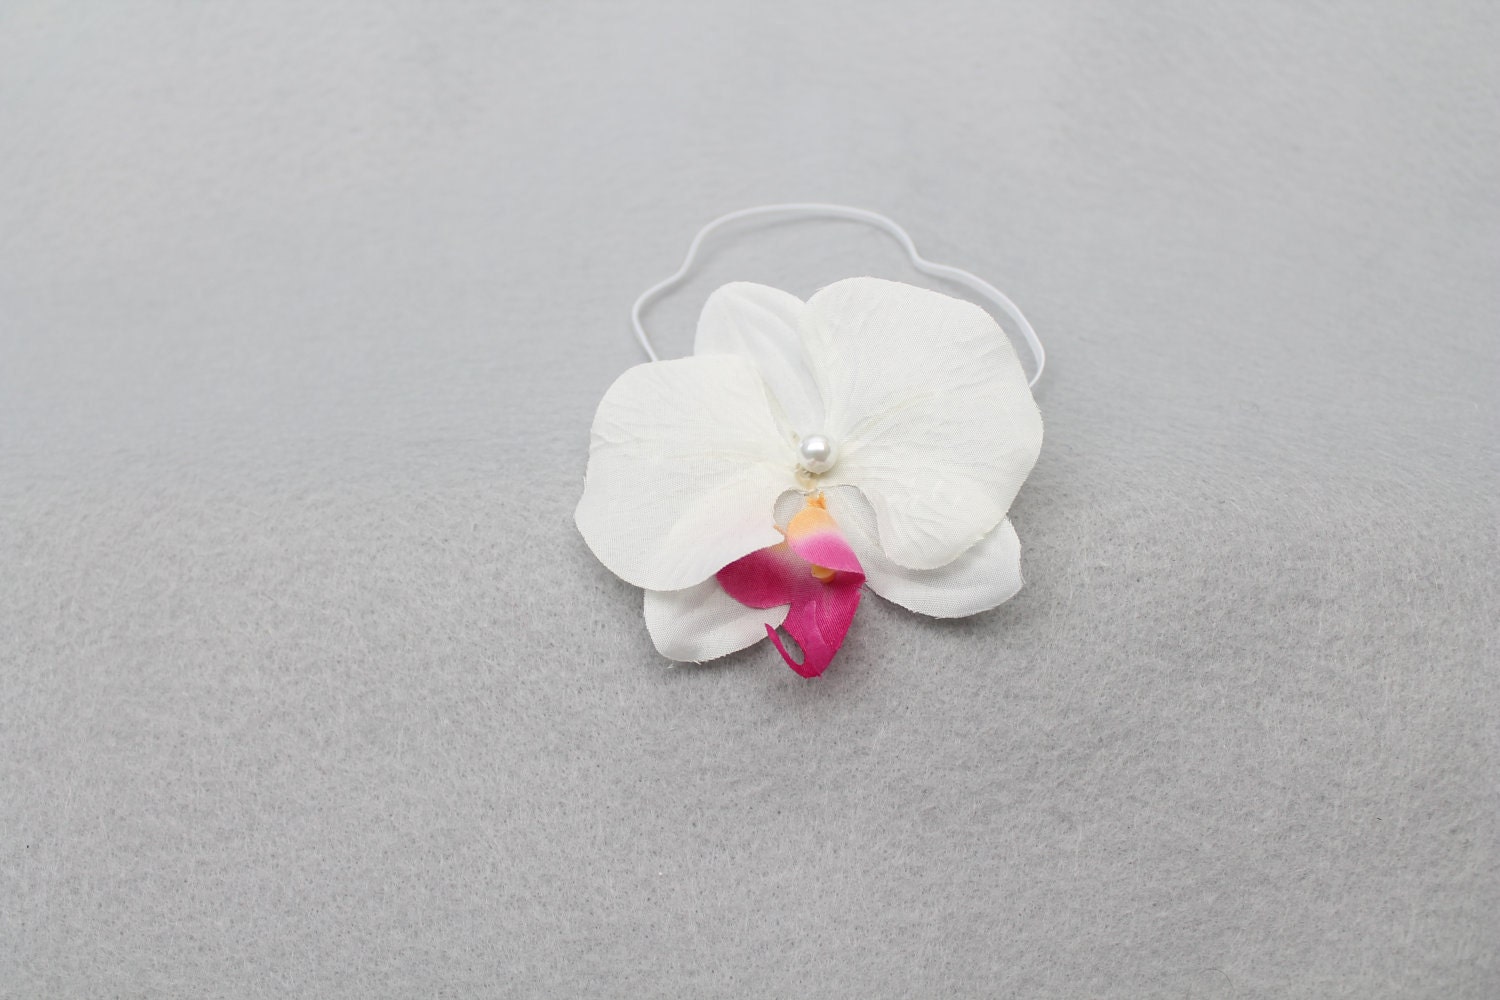 SALE...Orchid Flower Skinny Headband Newborn Photo Prop newborn-adult Free Shipping with another item in USA